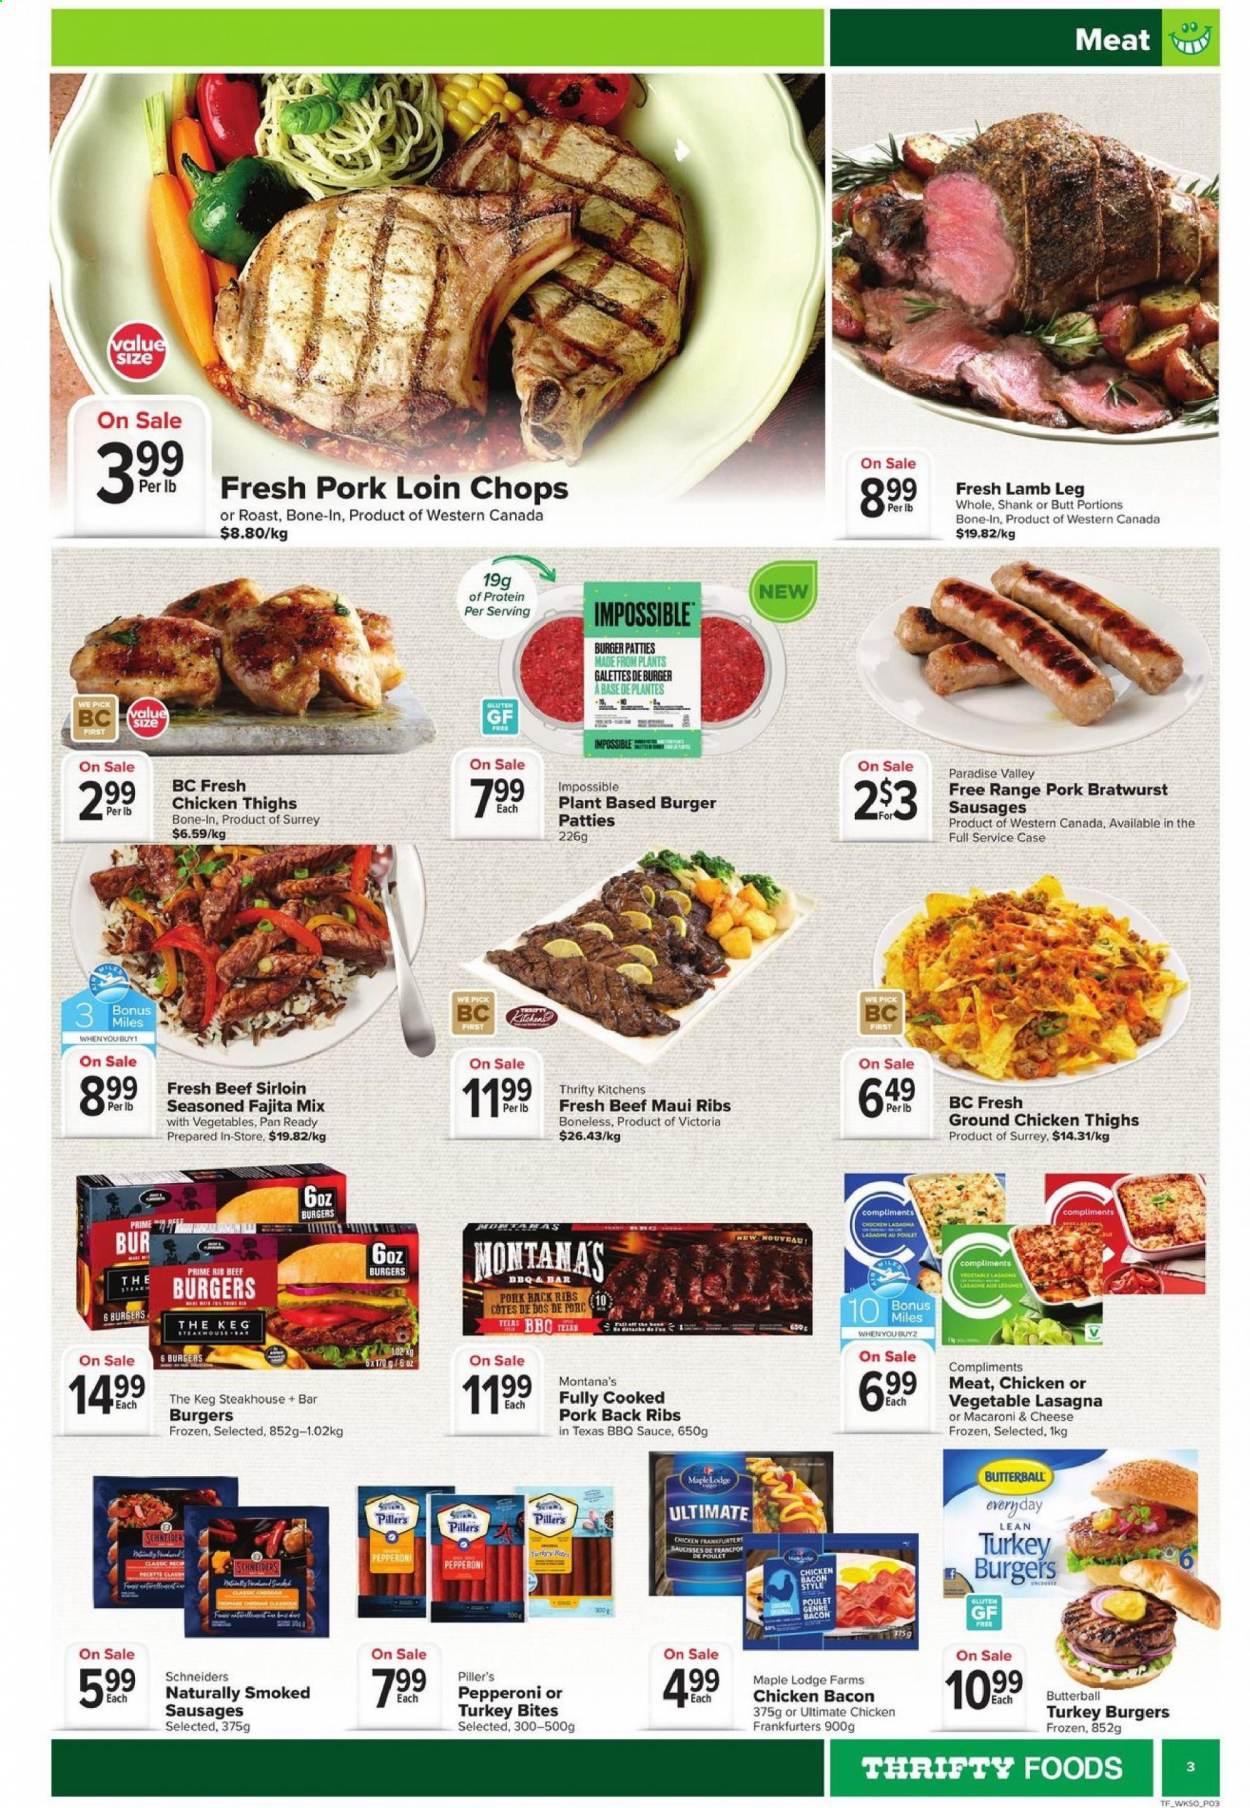 thumbnail - Thrifty Foods Flyer - April 08, 2021 - April 14, 2021 - Sales products - macaroni & cheese, pasta, sauce, veggie burger, beef burger, lasagna meal, burger patties, fajita mix, roast, ready meal, plant based ready meal, plant based product, bacon, Butterball, bratwurst, sausage, smoked sausage, pepperoni, chicken frankfurters, frankfurters, bars, BBQ sauce, ground chicken, chicken thighs, chicken, beef meat, beef sirloin, turkey burger, pork chops, pork loin, lamb meat, lamb leg. Page 3.